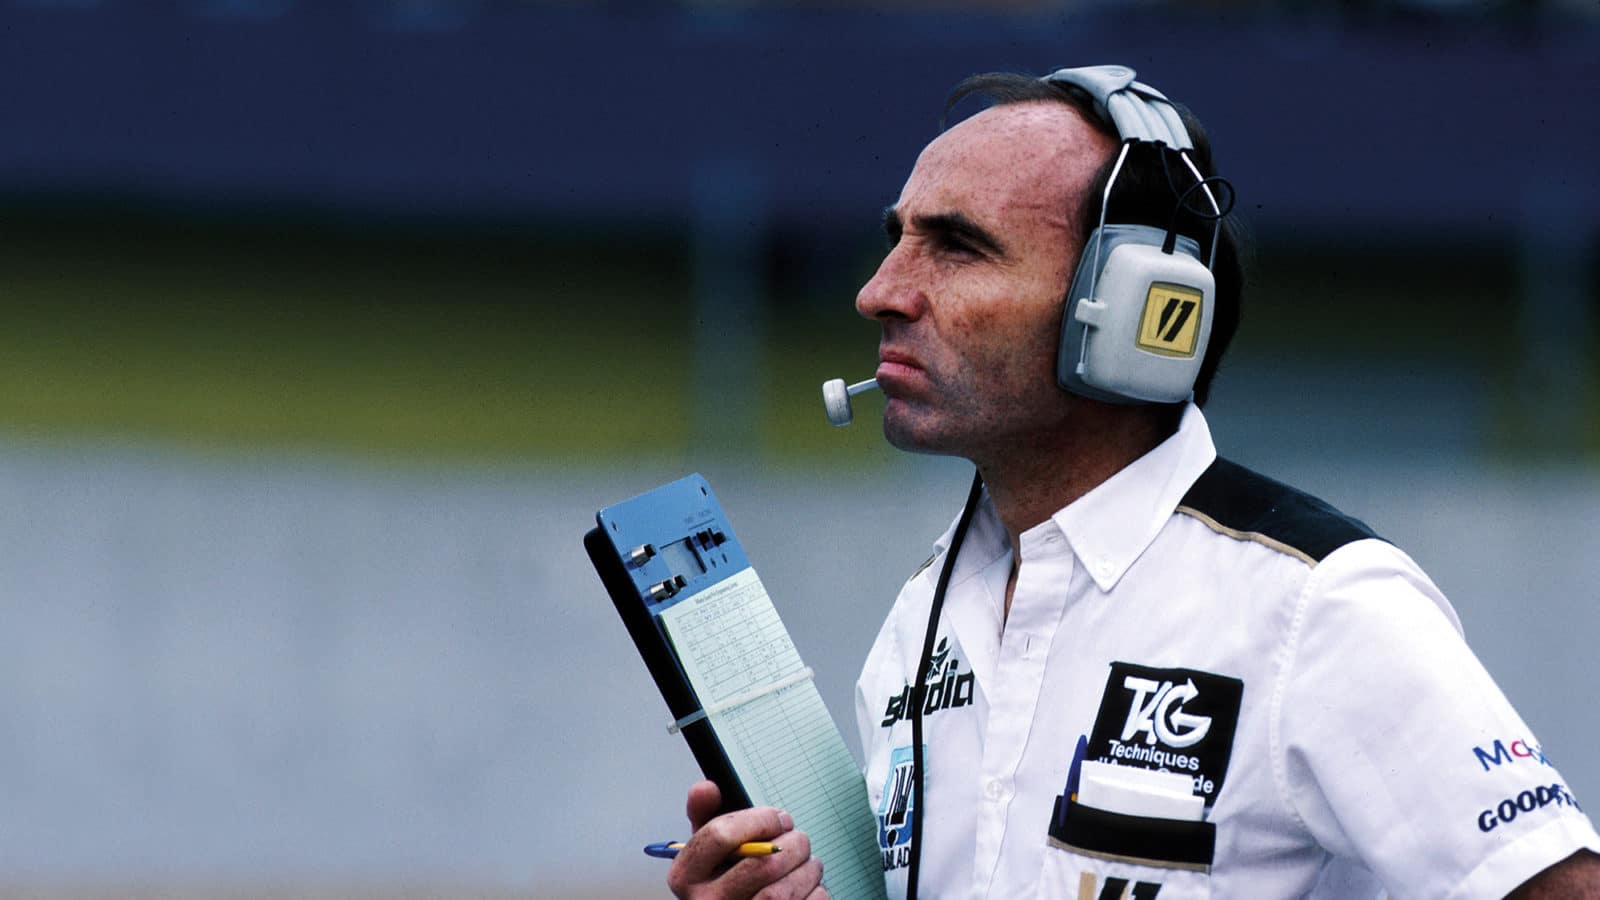 Frank Williams with clipboard and headphones